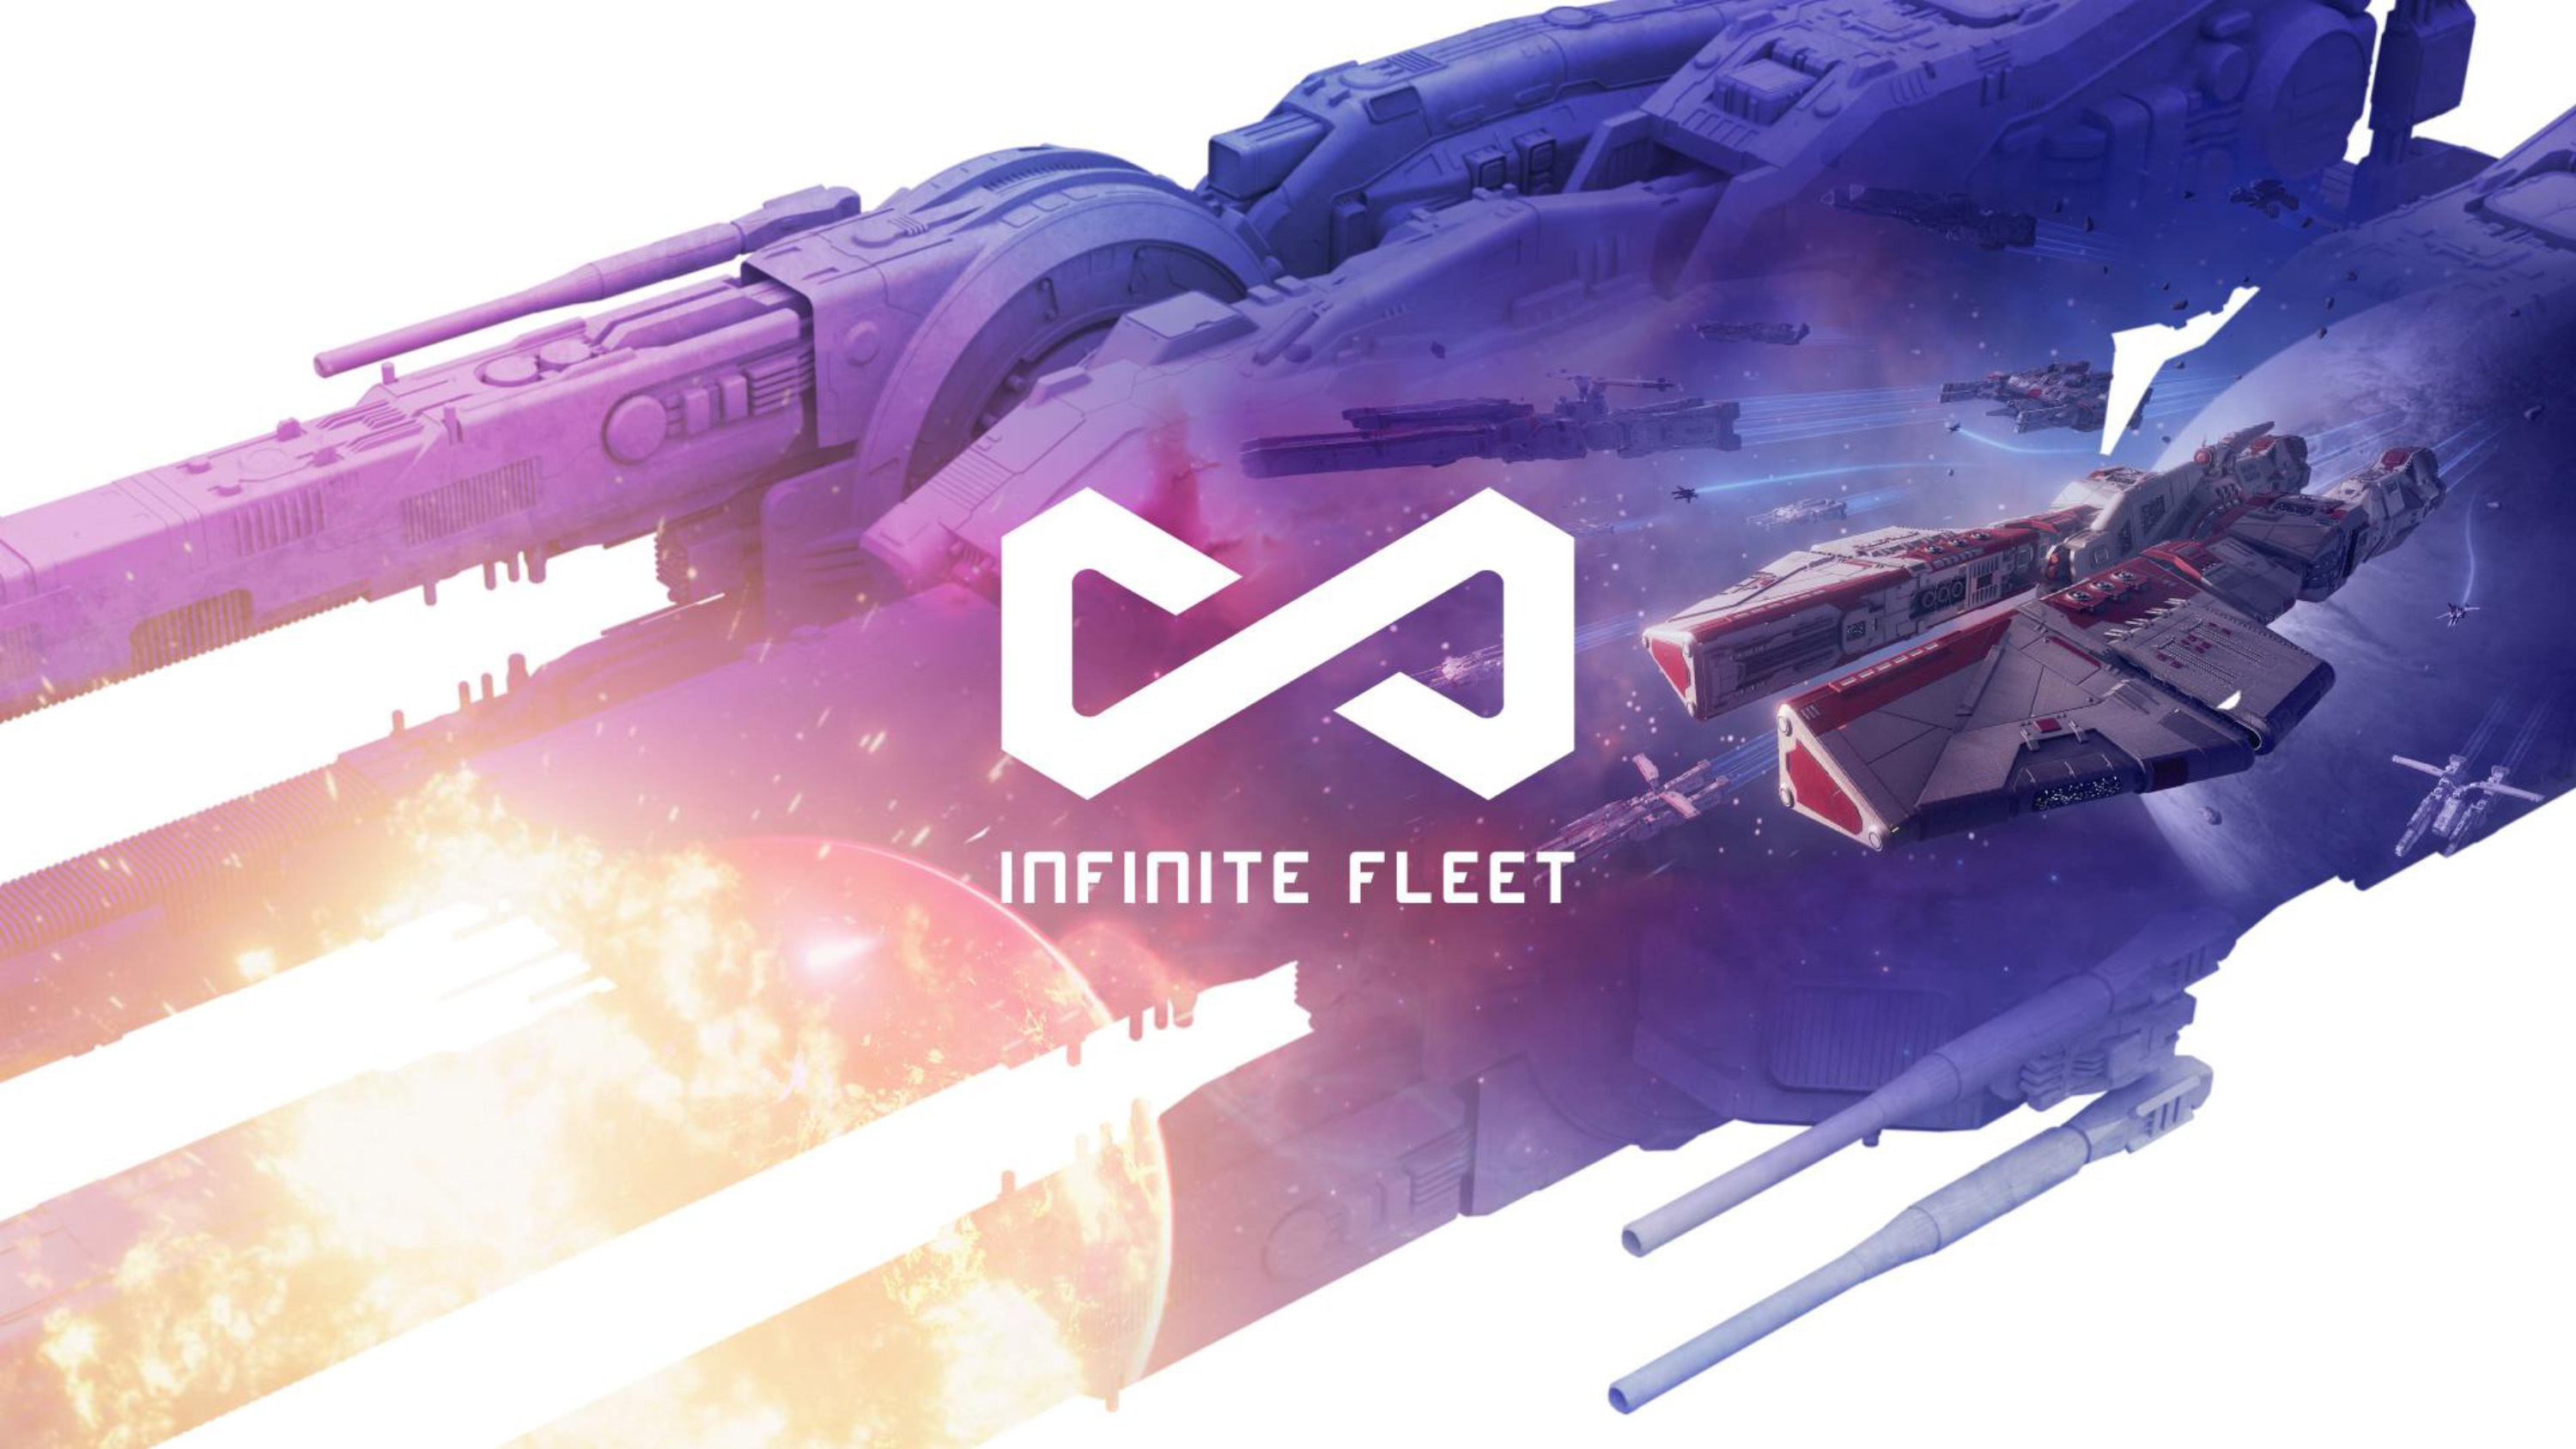 Infinite Fleet Raises $3.1 Million in Oversubscribed Round Led by Bitcoin Industry Leaders